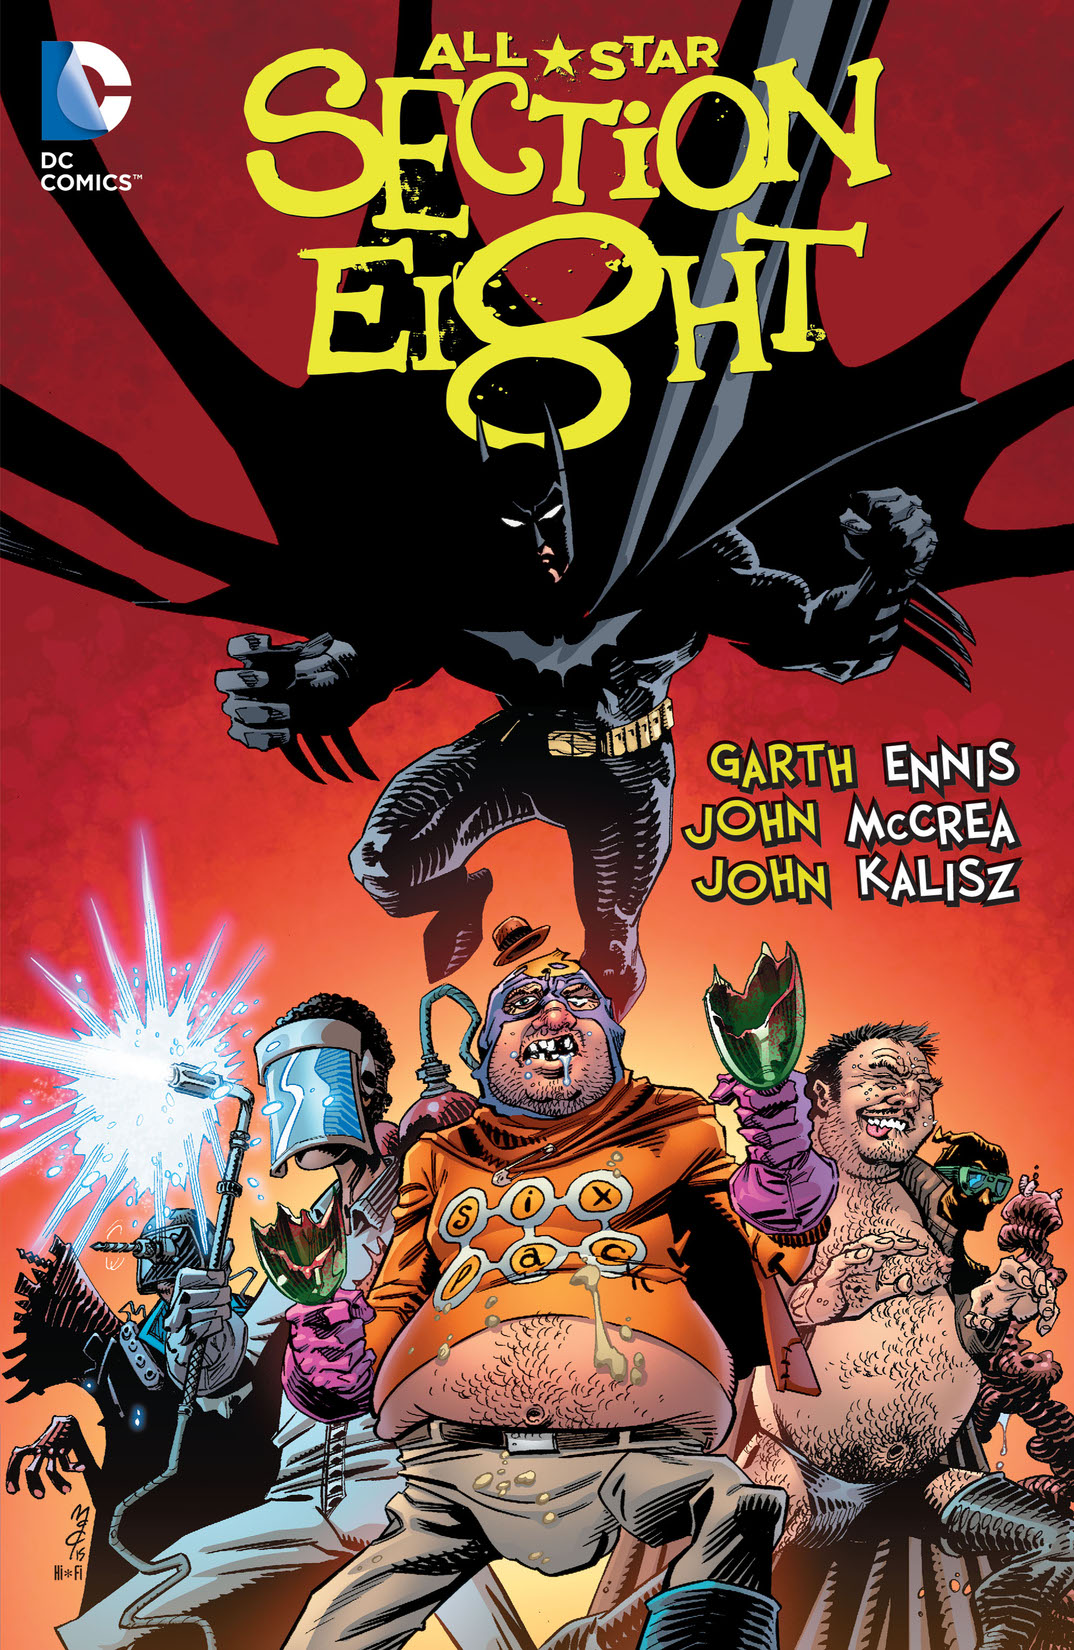 All-Star Section Eight preview images